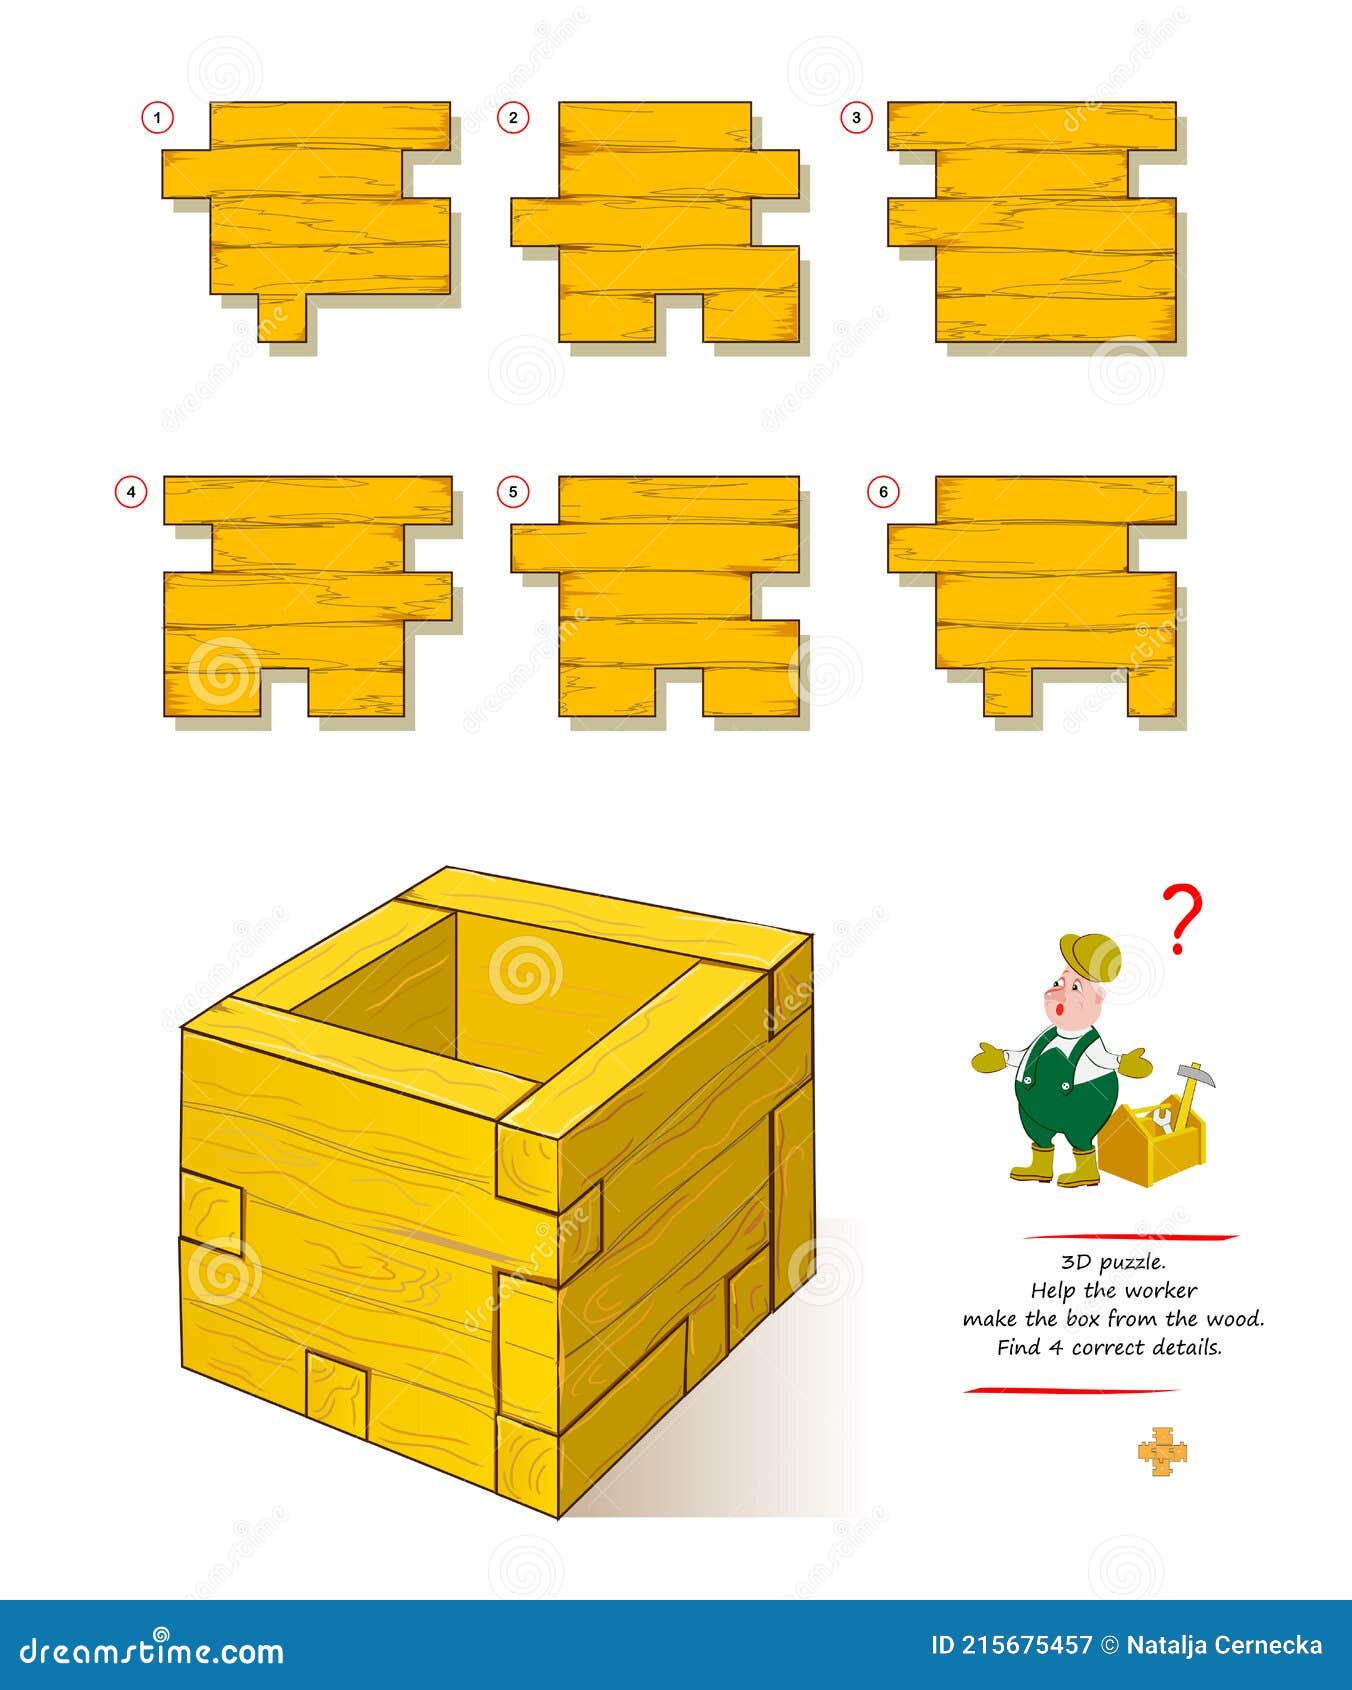 logic game for smartest. 3d puzzle. help the worker make the box from wood. find 4 correct details. brain teaser book. play online